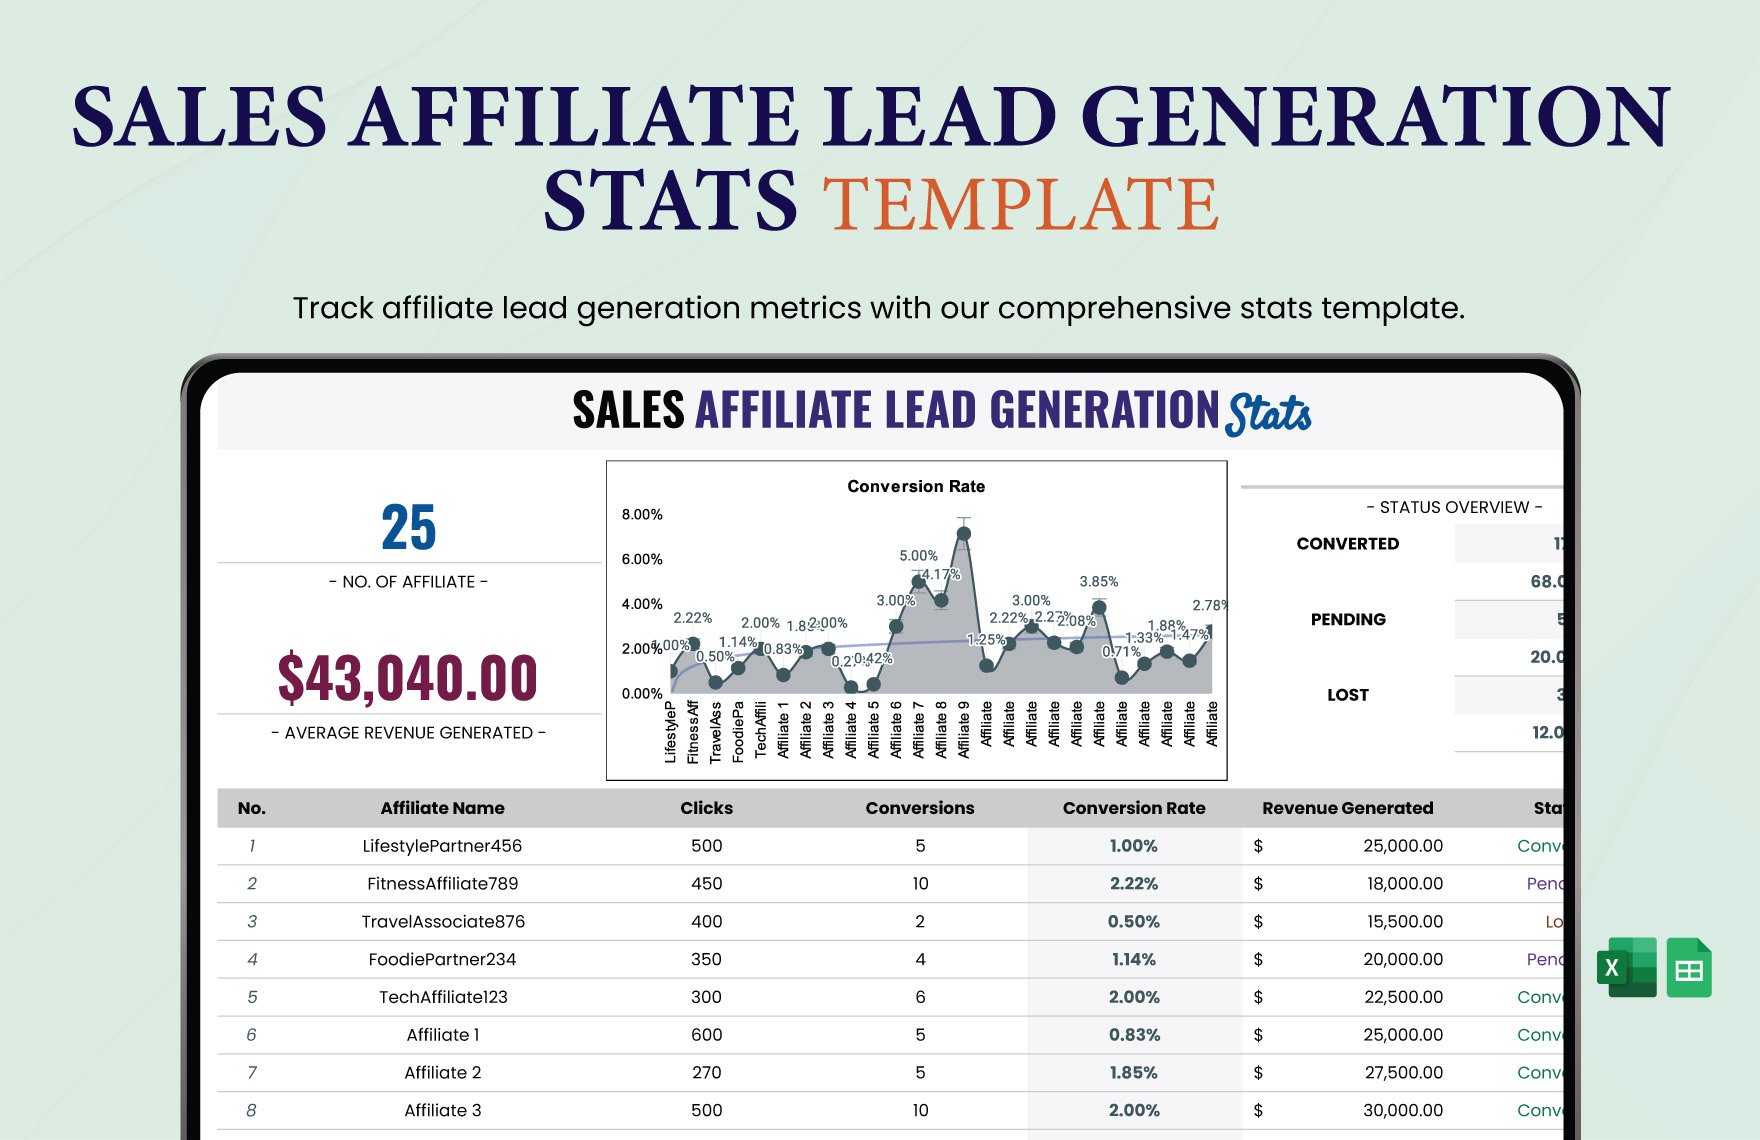 Sales Affiliate Lead Generation Stats Template